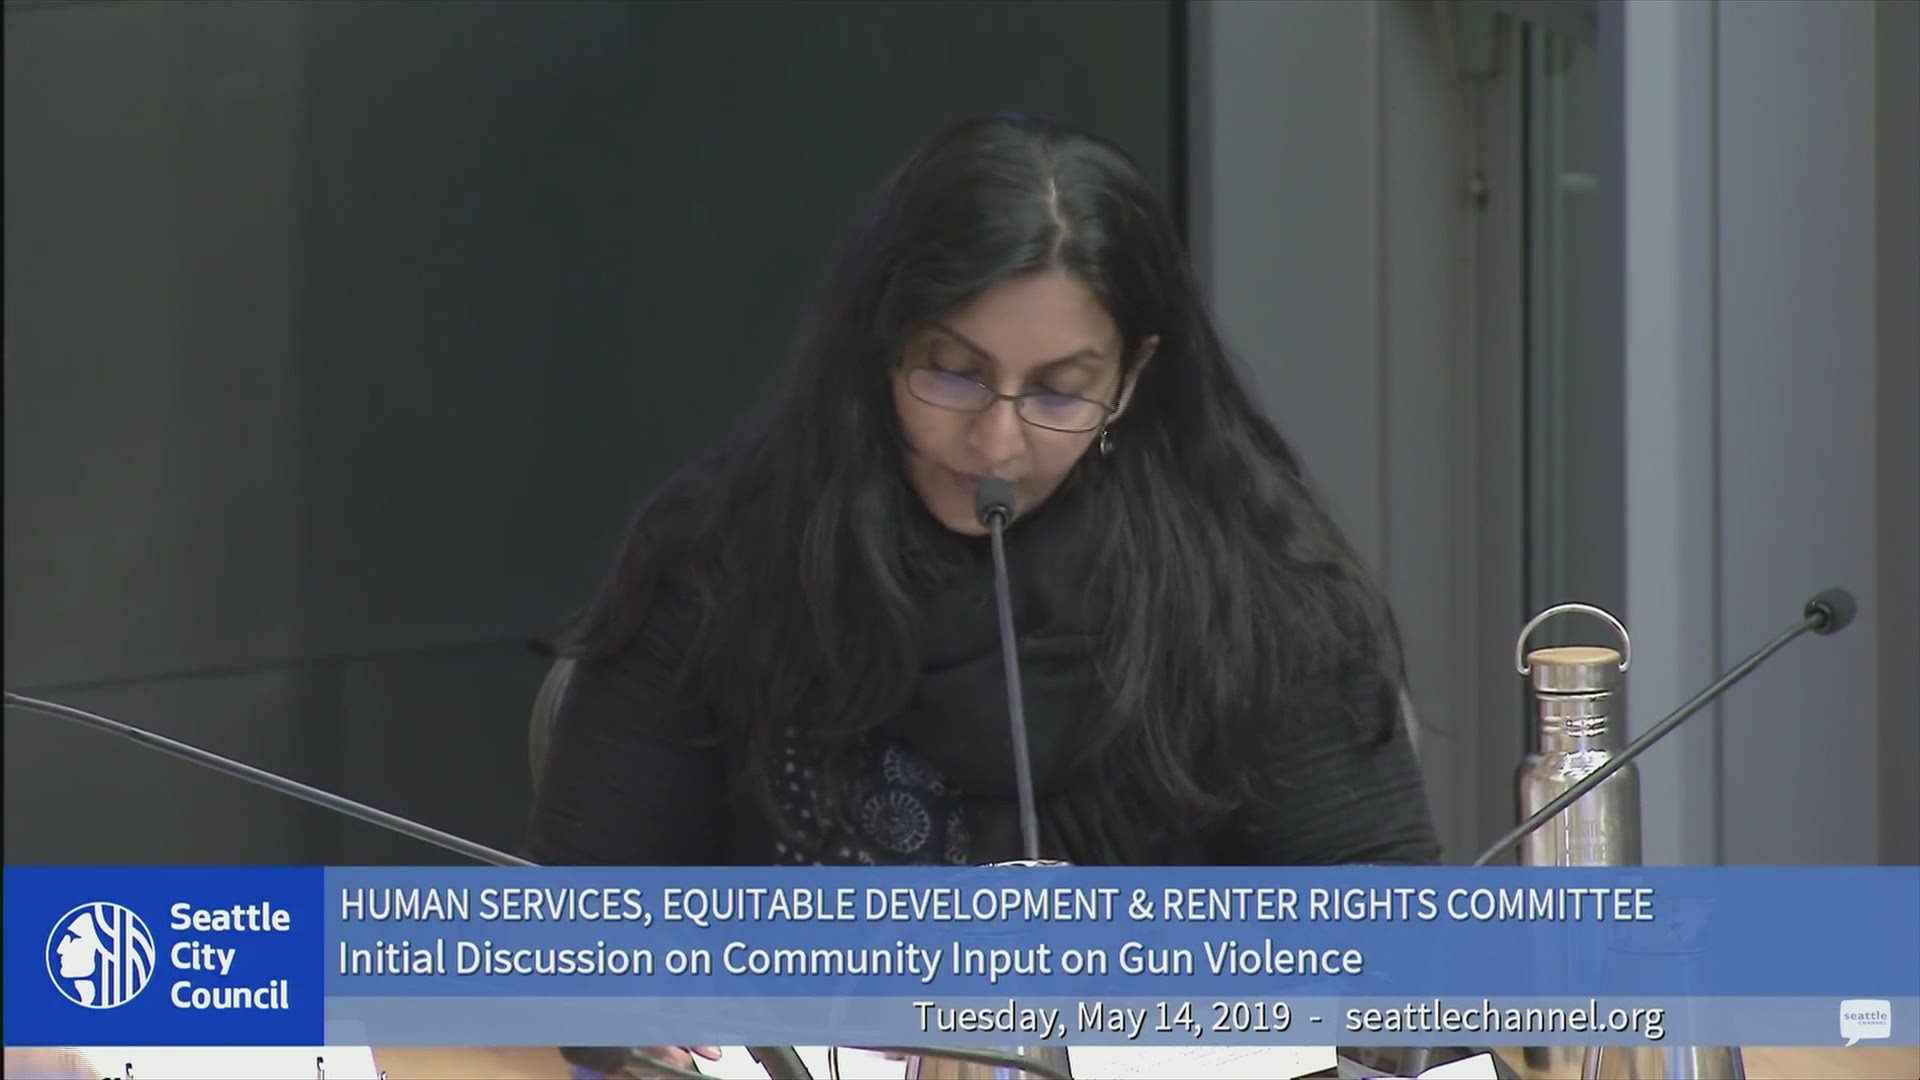 After hearing from community members, Kshama Sawant said she would like the city to study the use of traffic calming measures to reduce drive-by shootings.